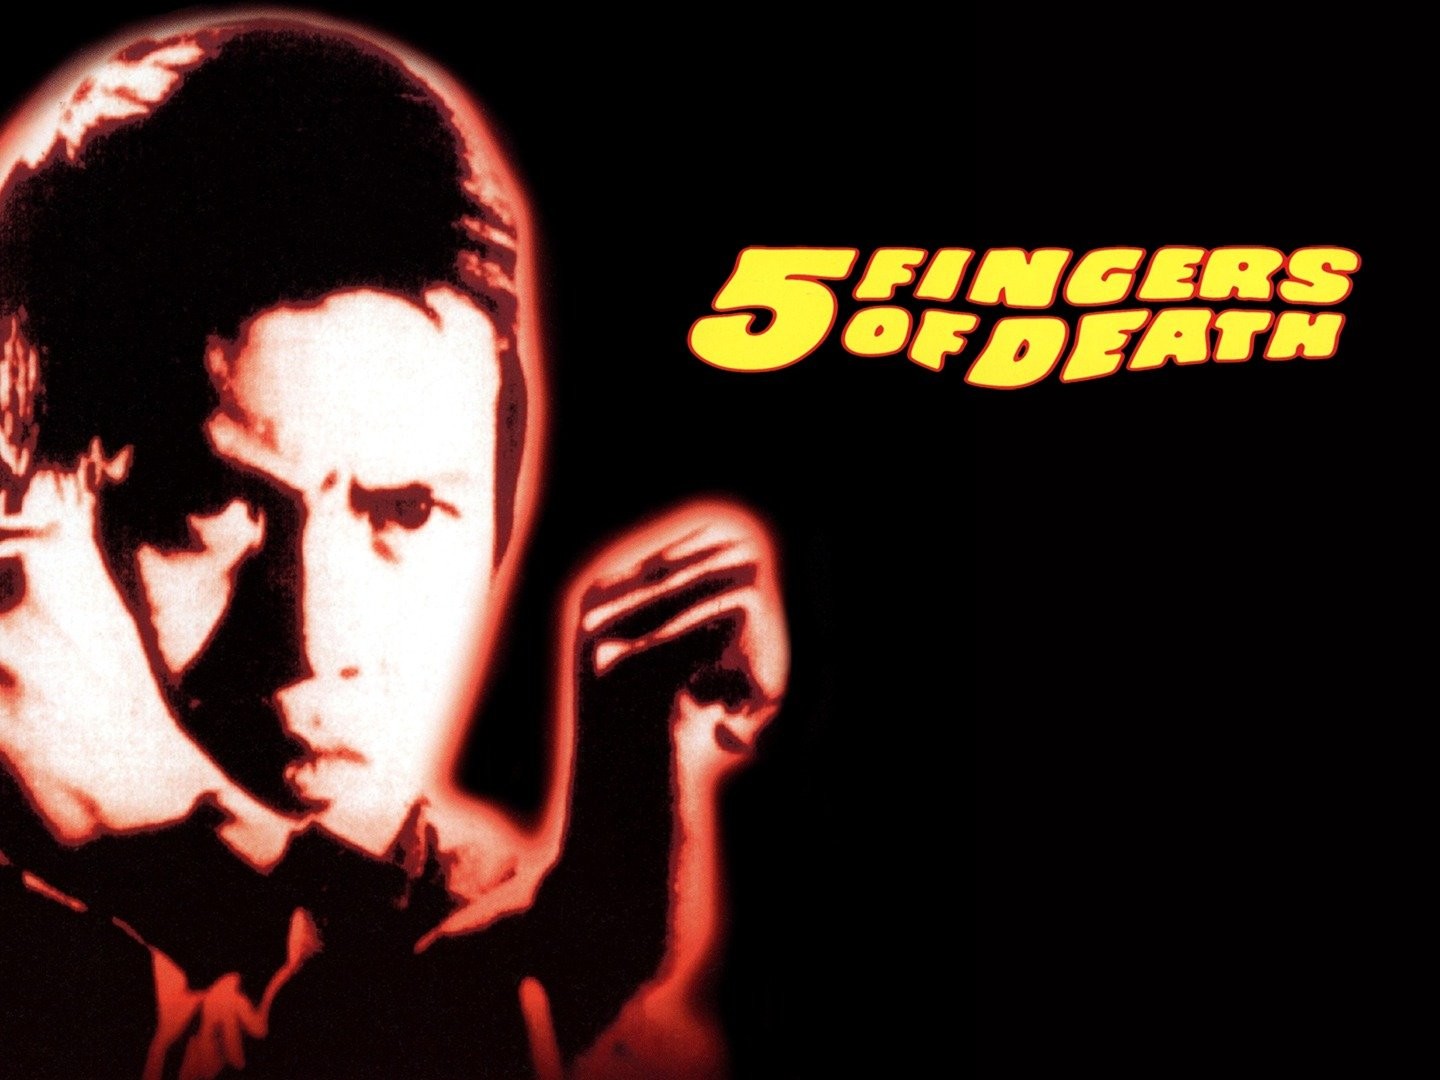 43-facts-about-the-movie-five-fingers-of-death